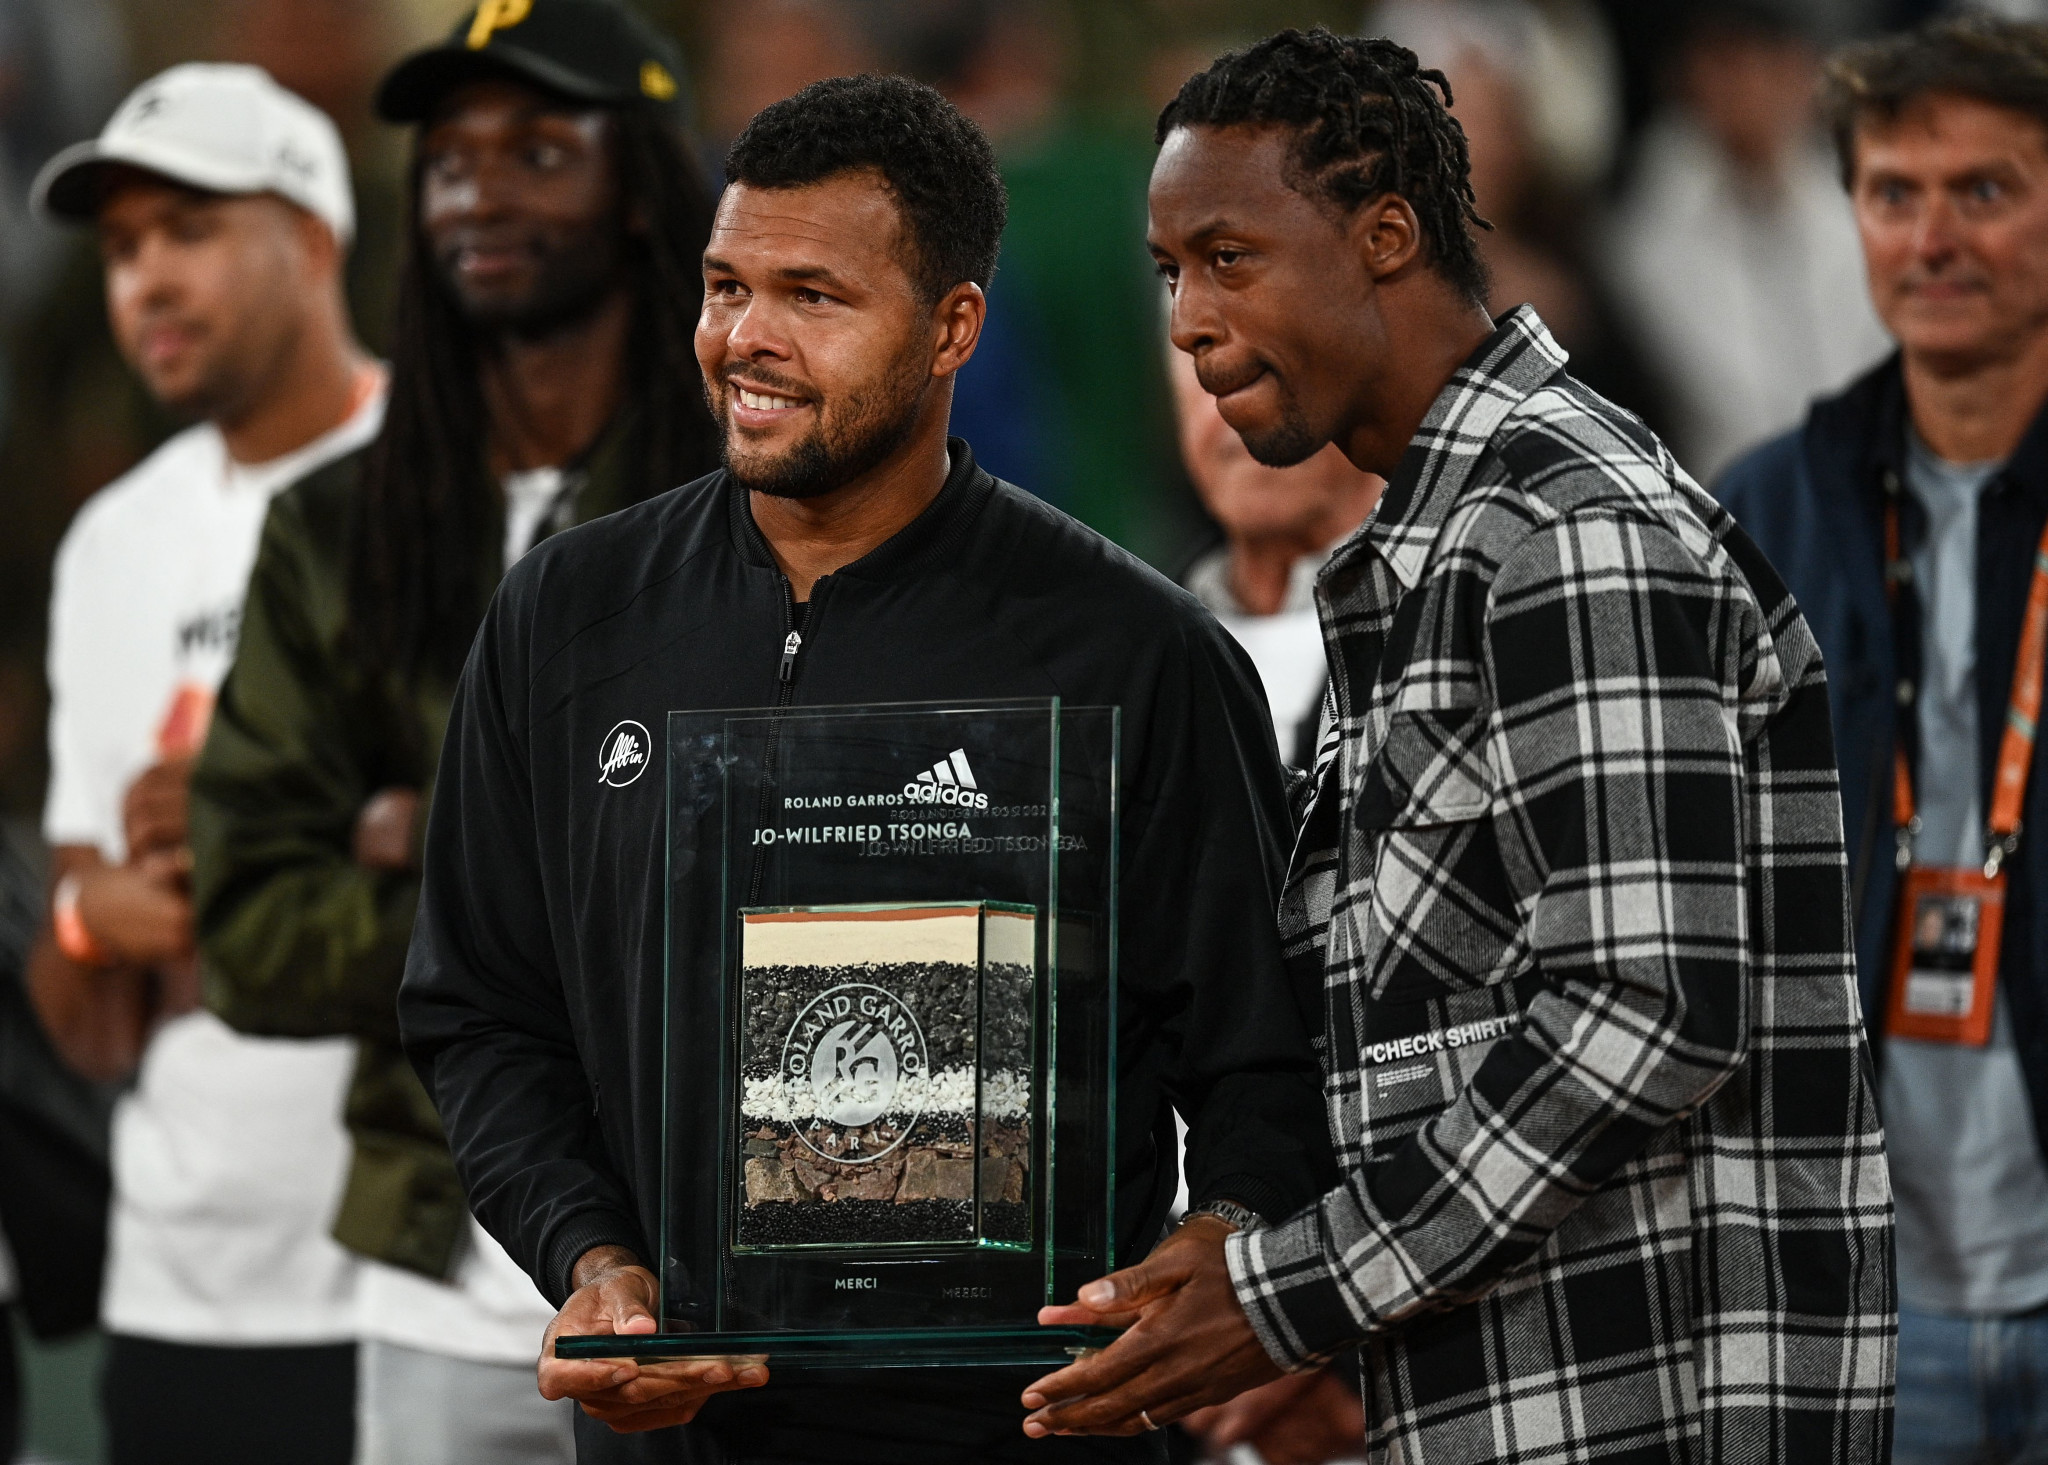 Jo-Wilfried Tsonga, left, poses with Gael Monfils after receiving a trophy to mark his retirement ©Getty Images